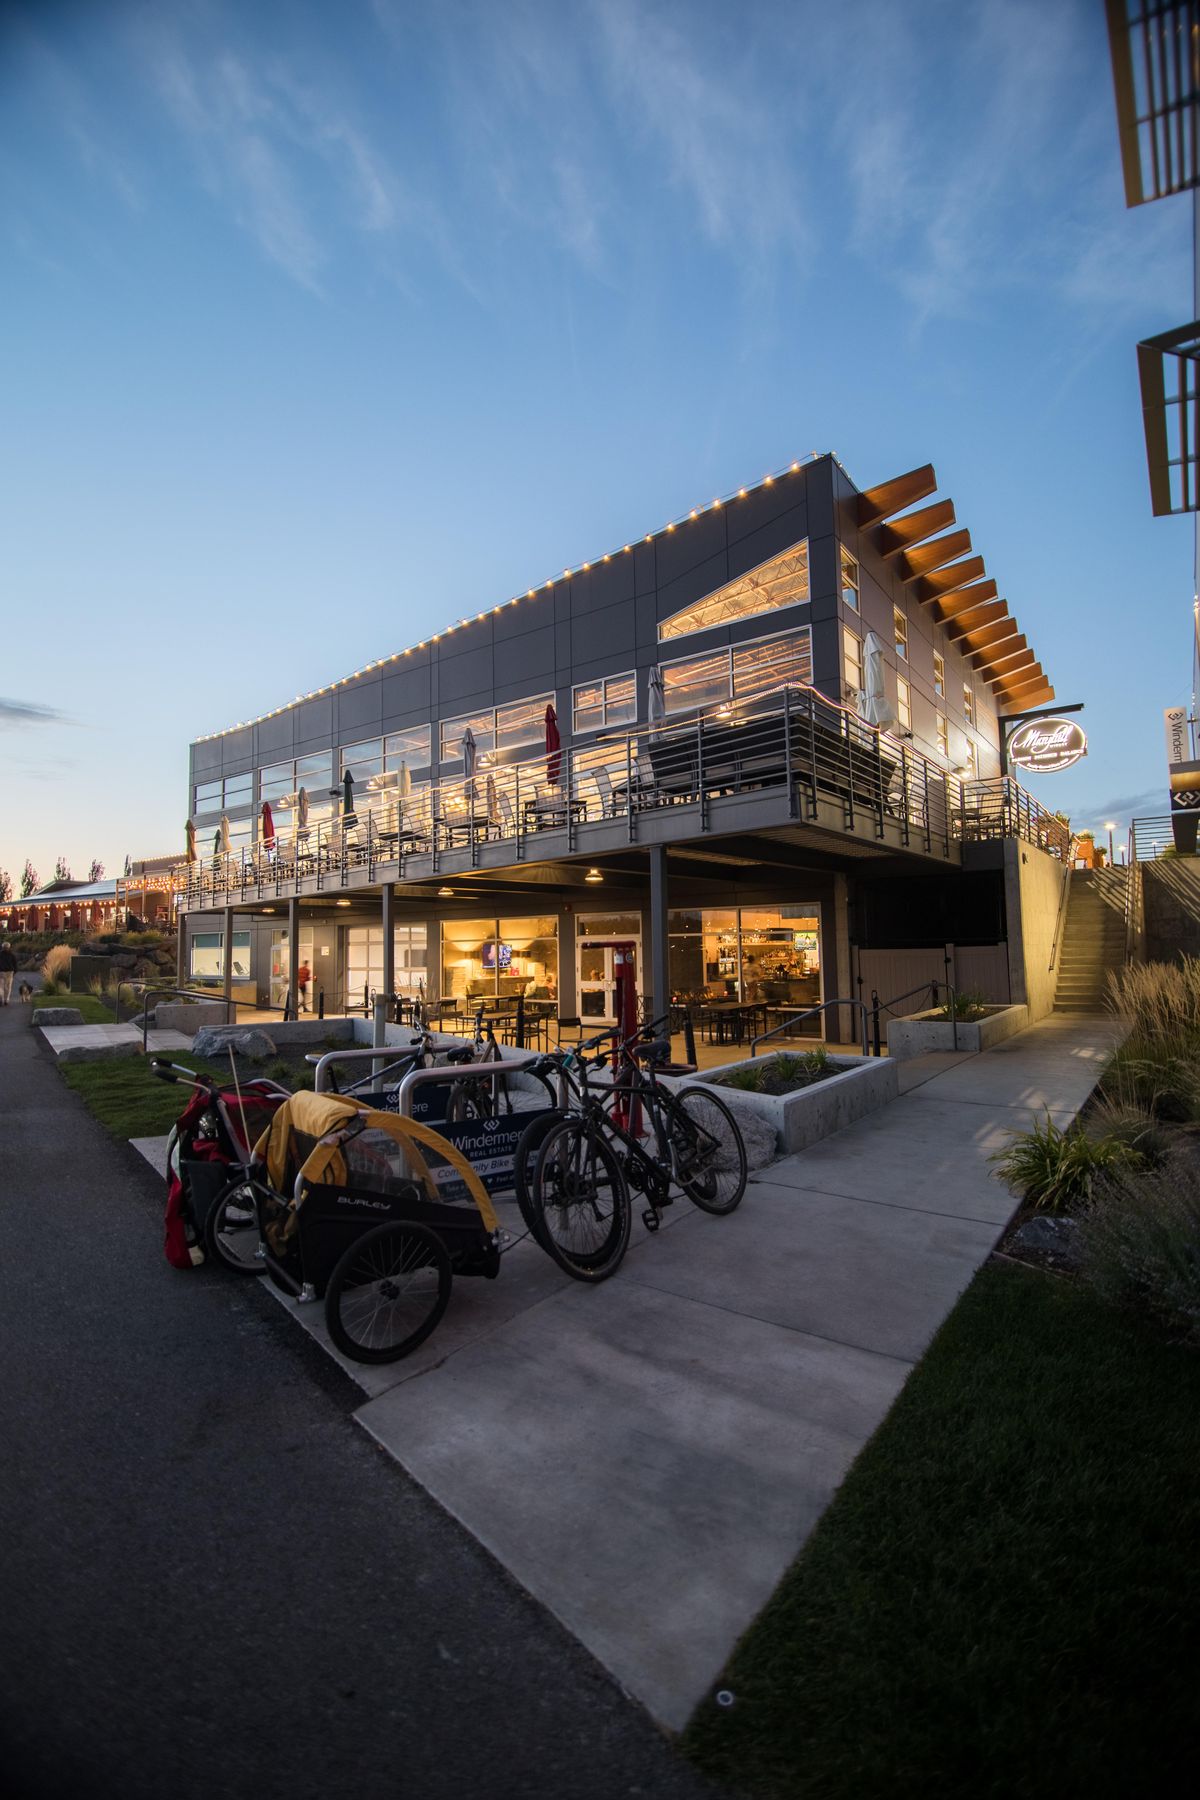 Maryhill Winery opened its first satellite tasting room in 2017 at Kendall Yards in Spokane, a city that Craig and Vicki Leuthold still call home. (Laree Weaver / Maryhill Winery)